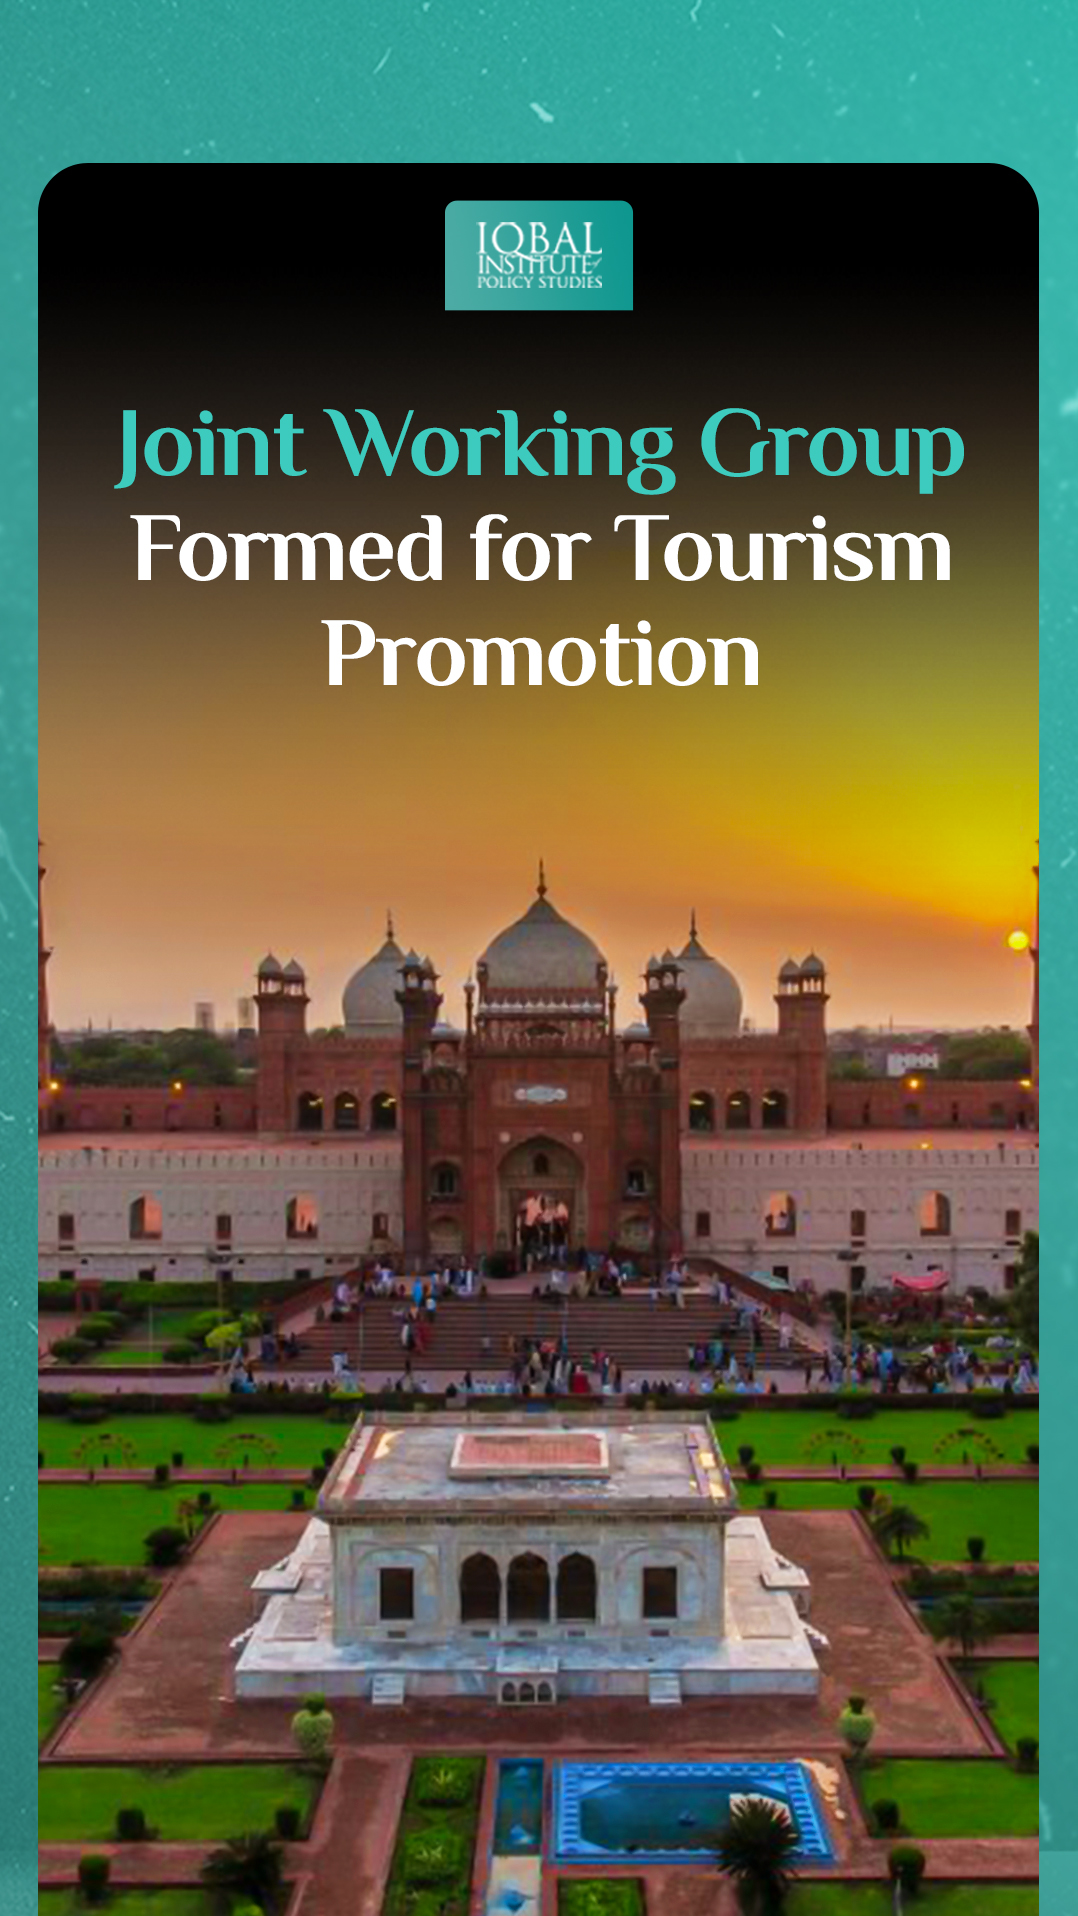 Joint Working Group formed for Tourism Promotion